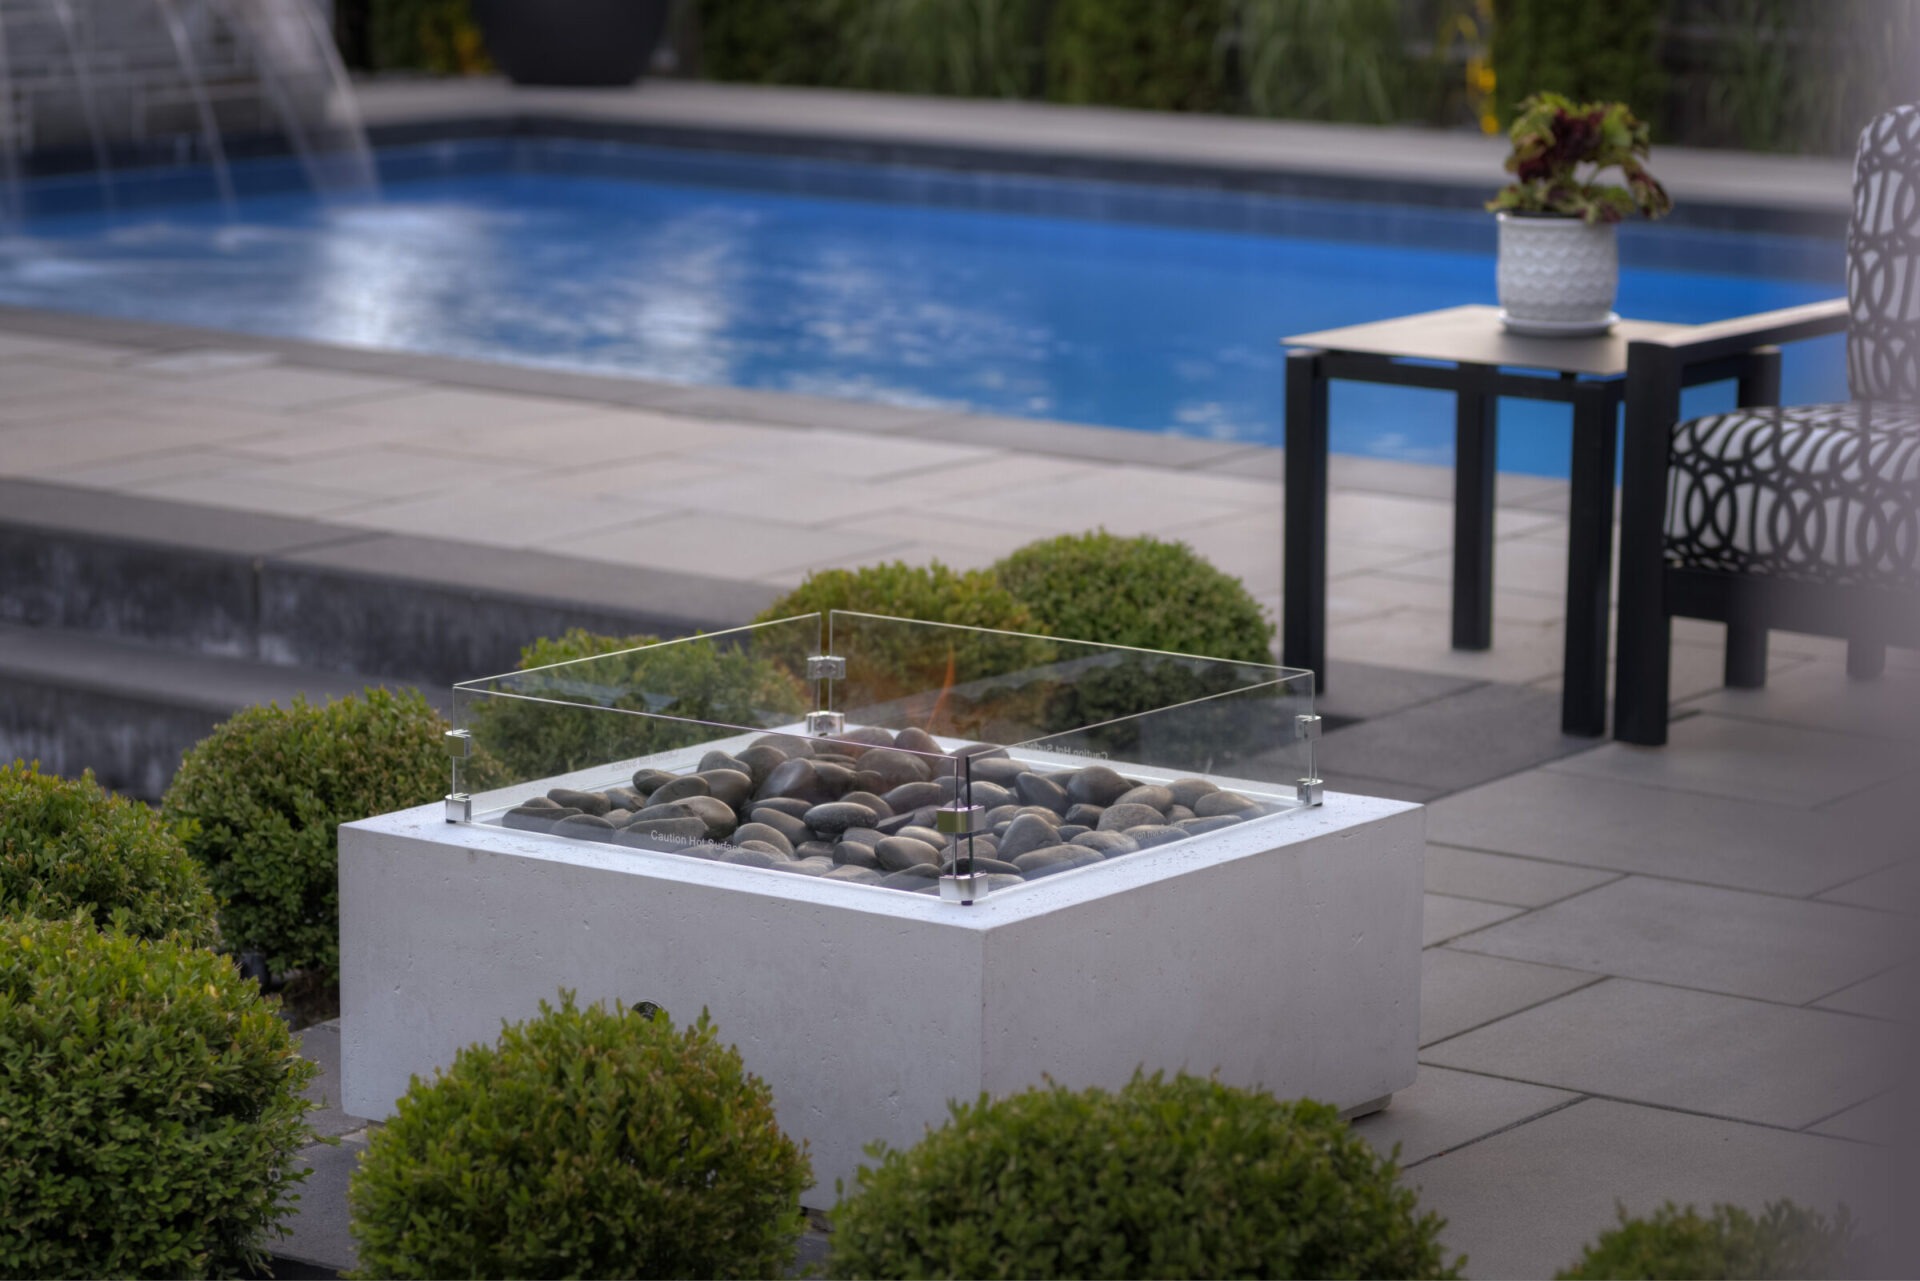 An outdoor setting with a modern fire pit surrounded by rocks, near a pool. Shrubbery, a patio, and outdoor furniture complete the tranquil scene.